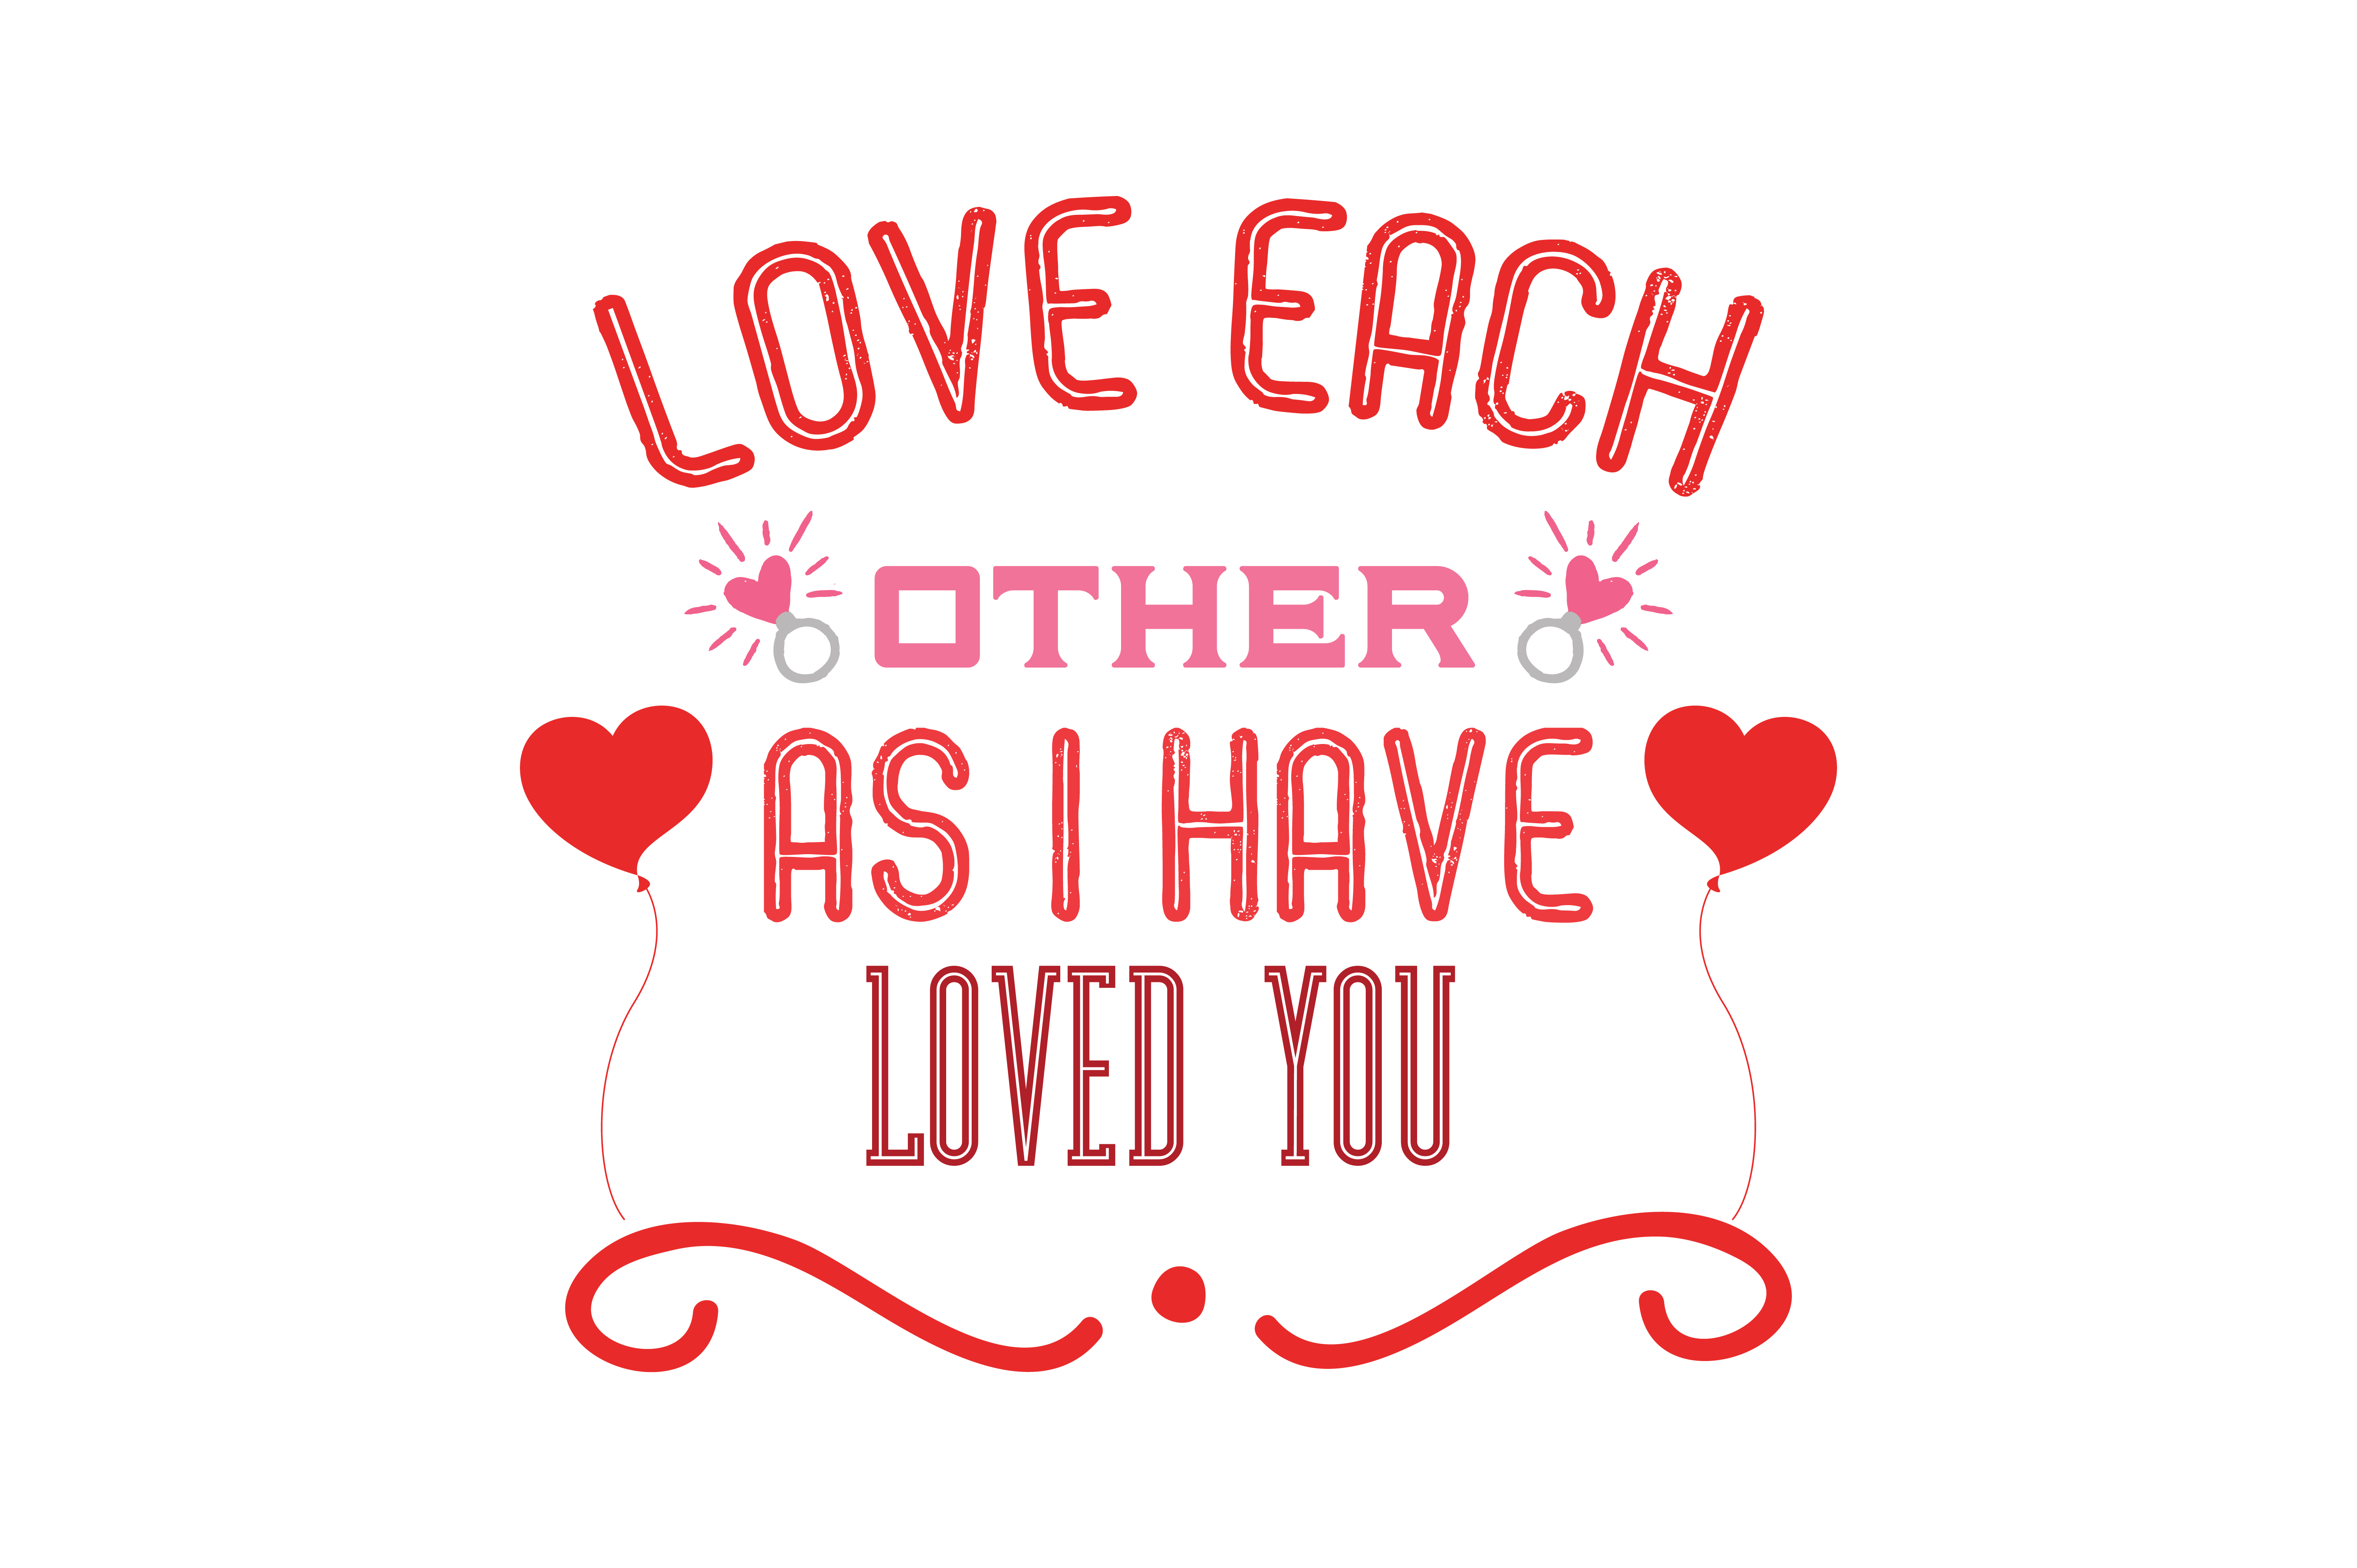 Love Each Other As I Have Loved You Quote Svg Cut Graphic By Thelucky Creative Fabrica